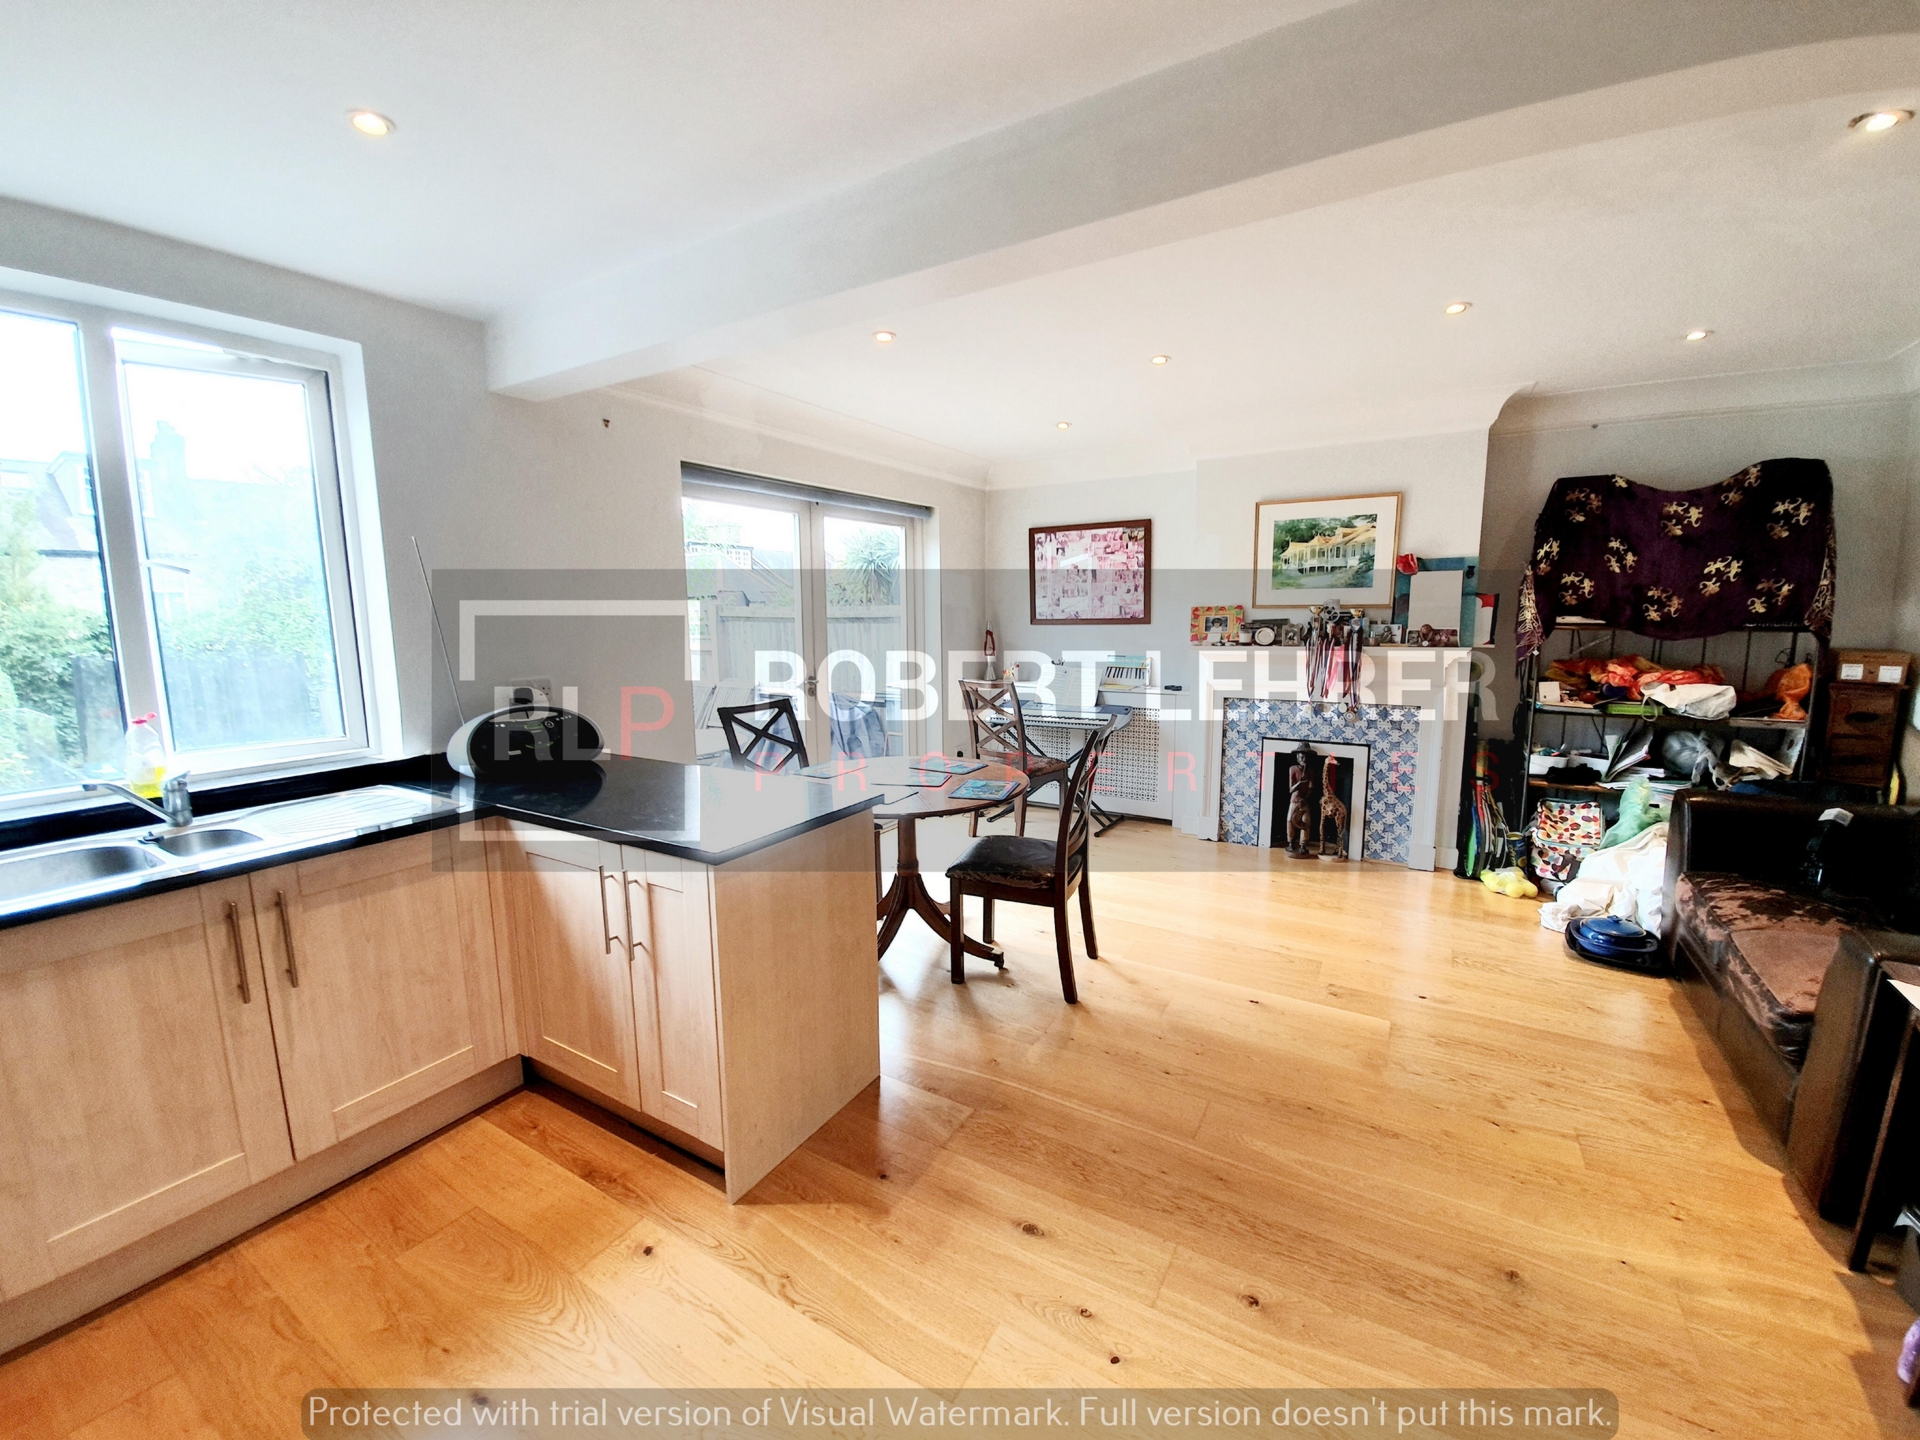 3 Bedroom House to rent in Muswell Hill, London, N10